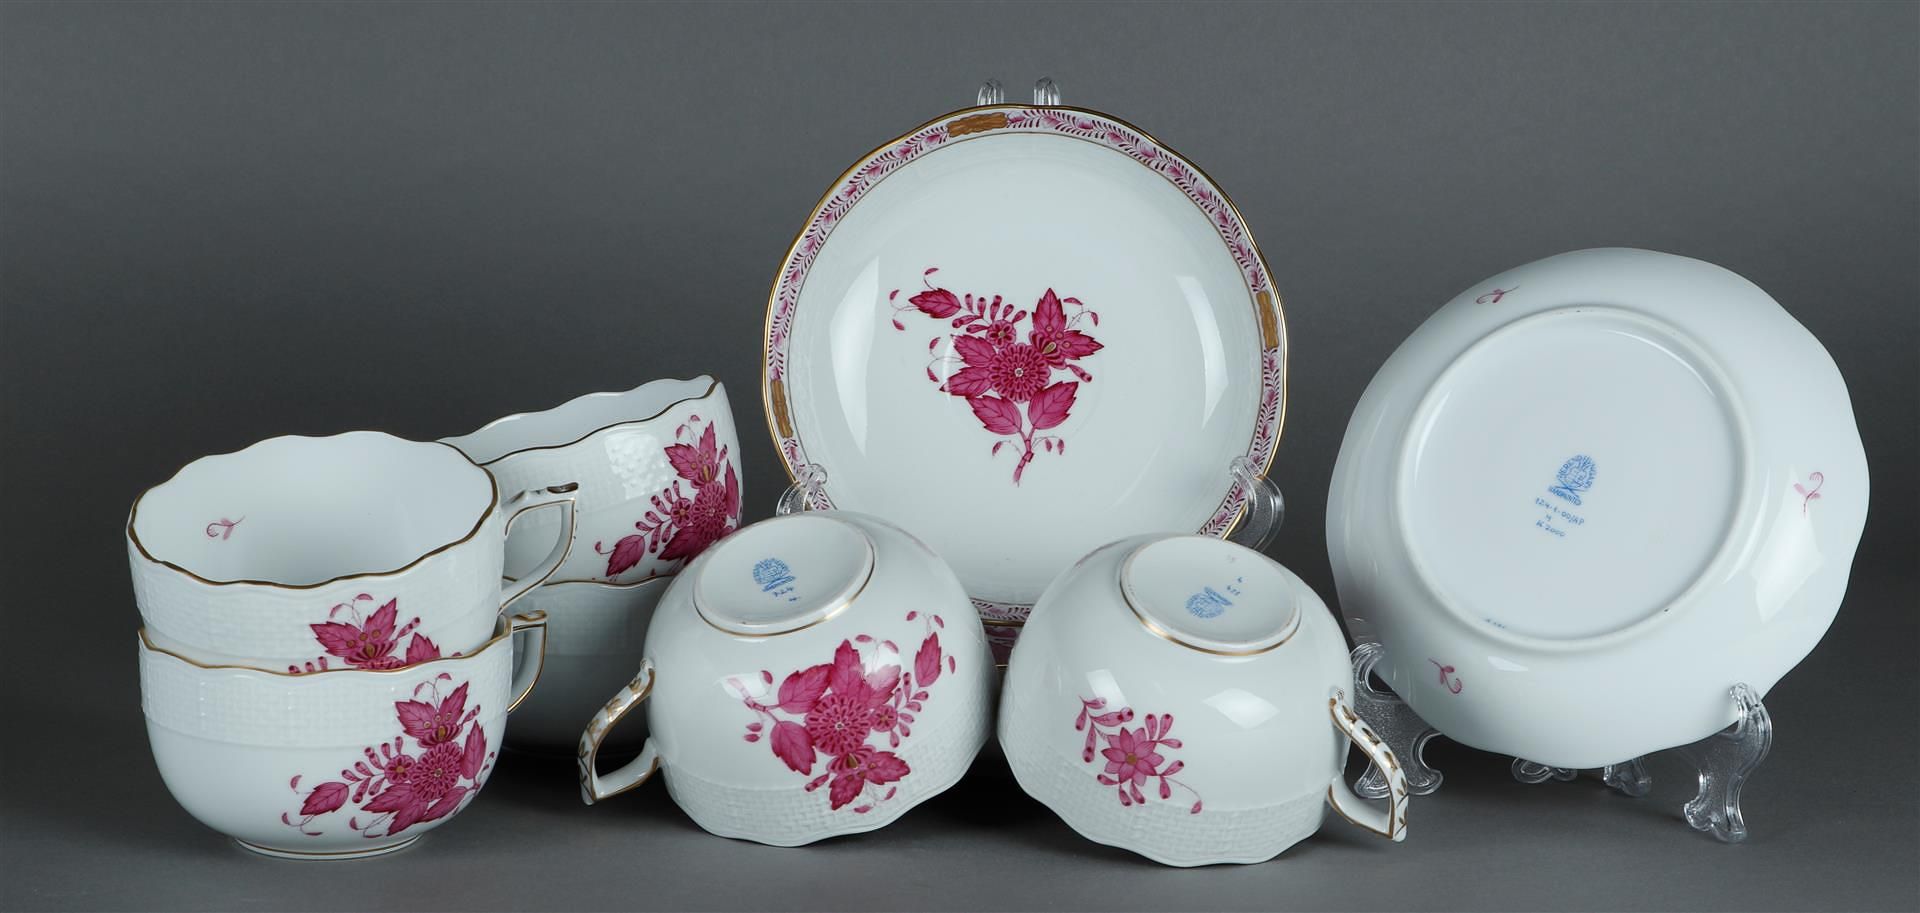 A set of 5 + 6 porcelain tea cups and saucers with apponyi purple decor. Herend, Hungary.